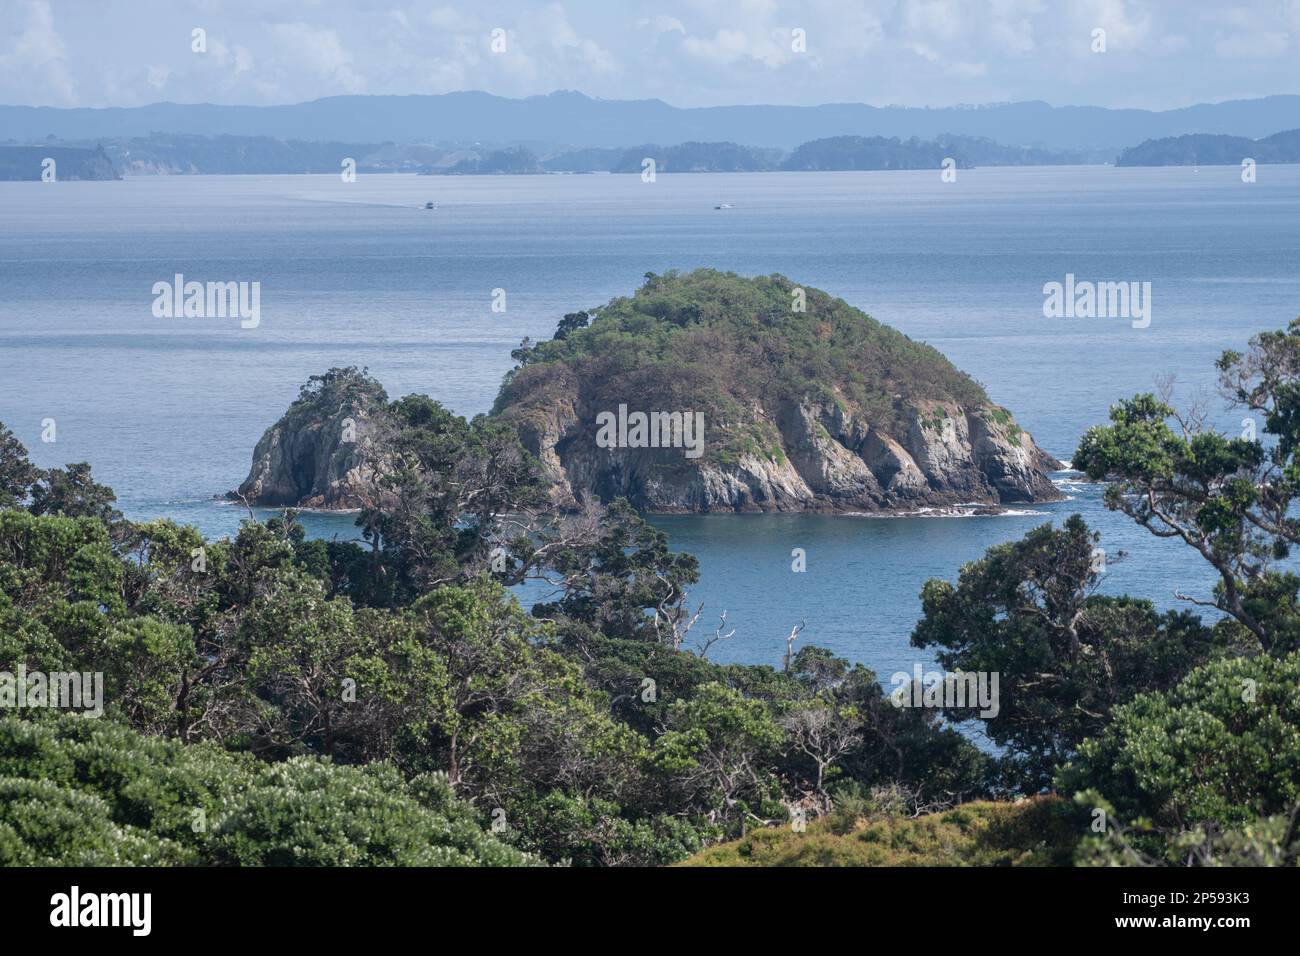 A pretty view of the coastline and pacific ocean from an offshore island near Auckland in Aotearoa New Zealand. Stock Photo